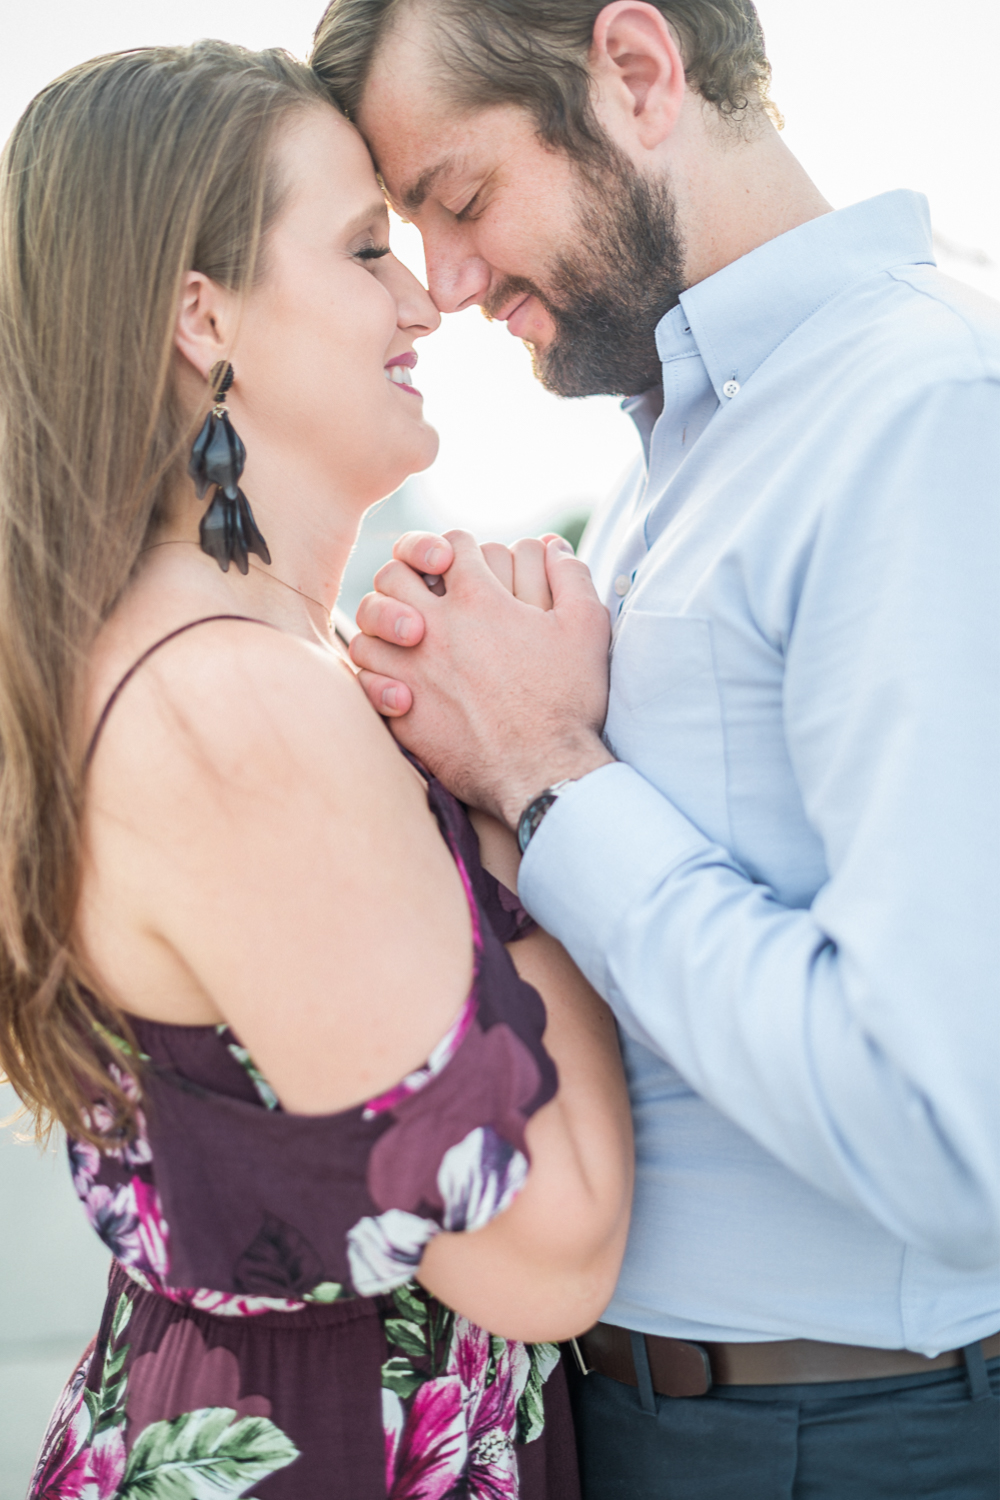 Urban Sunset Engagement Session on Charlottesville's Downtown Mall - Hunter and Sarah Photography